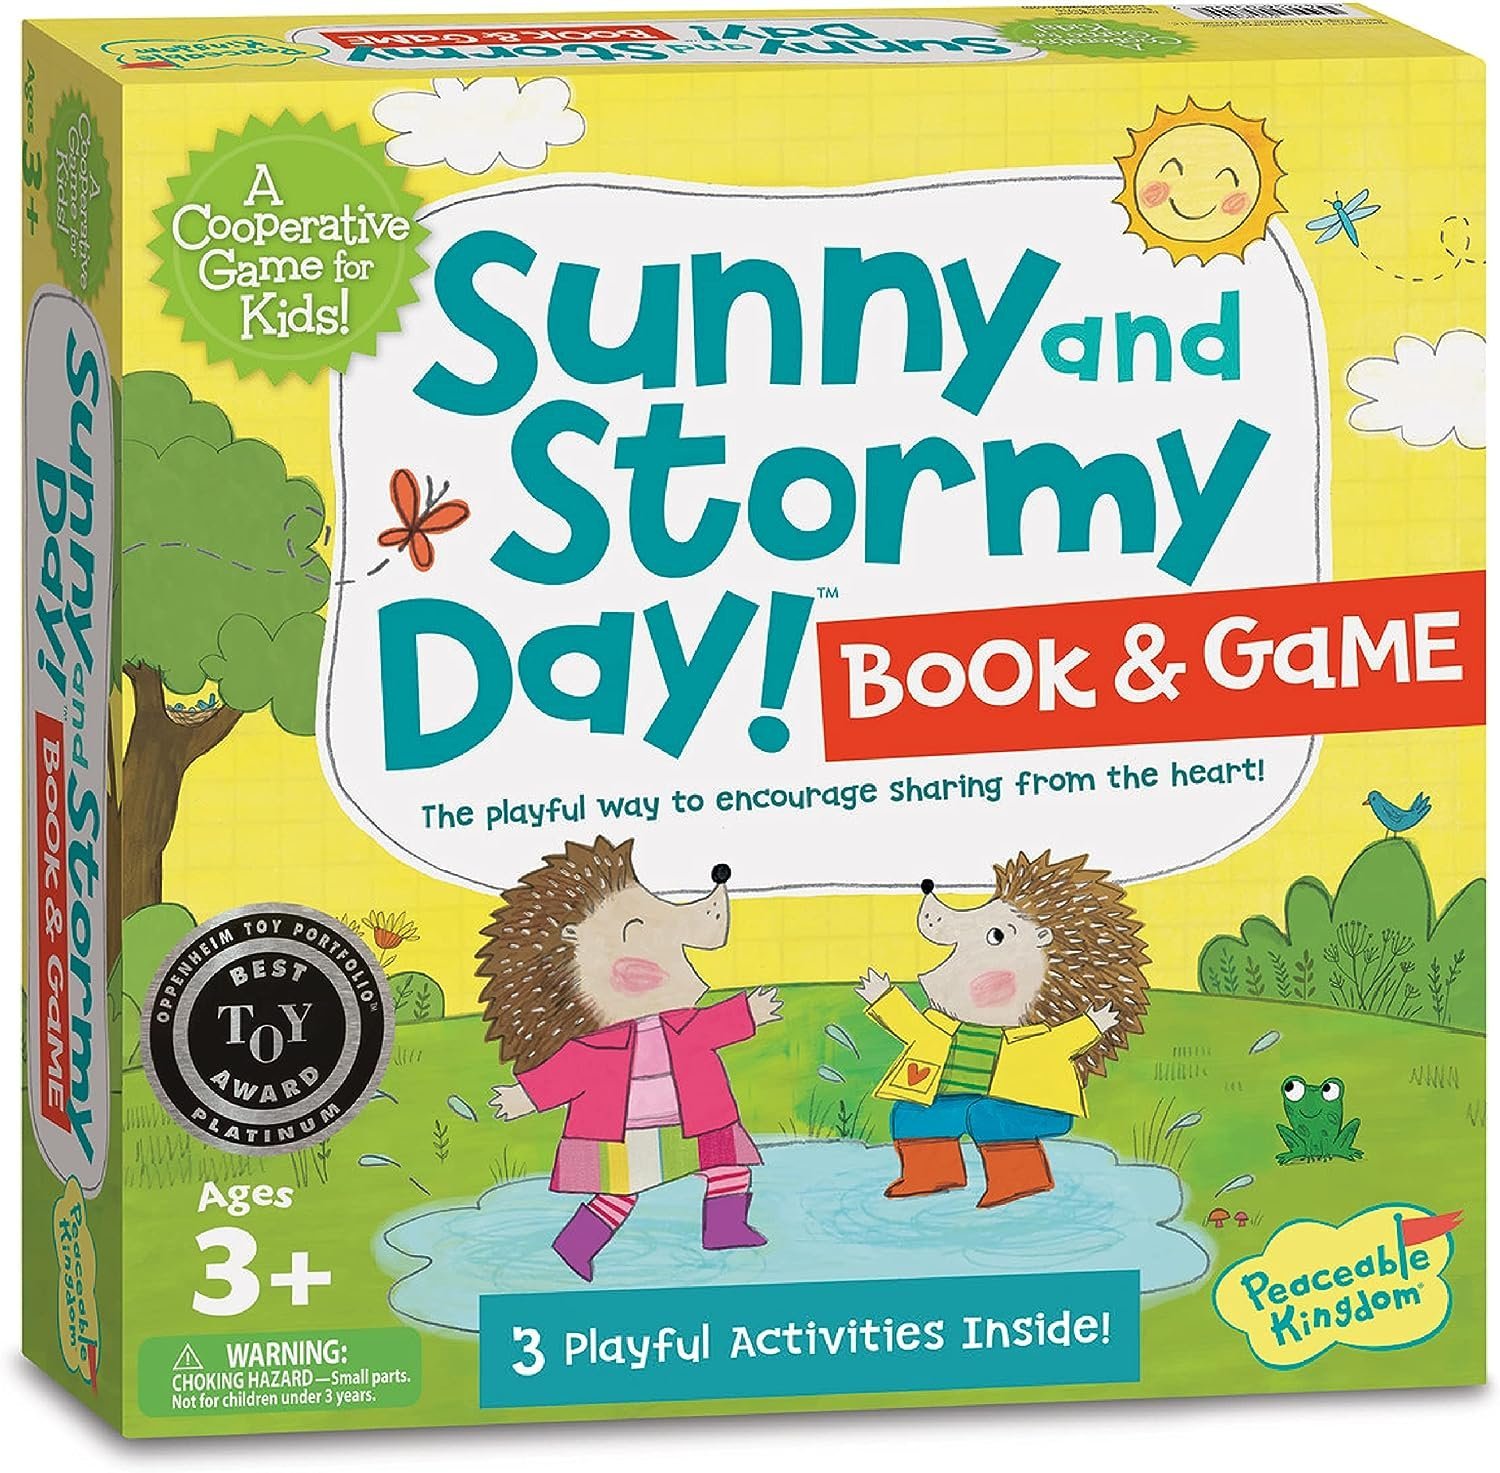 Sunny-and-stormy-day-sunnyandstormyday-by-Peaceable-Kingdom-Mindware-hedgehog-activity-game-story-book-by-Lesley-Breen.jpg